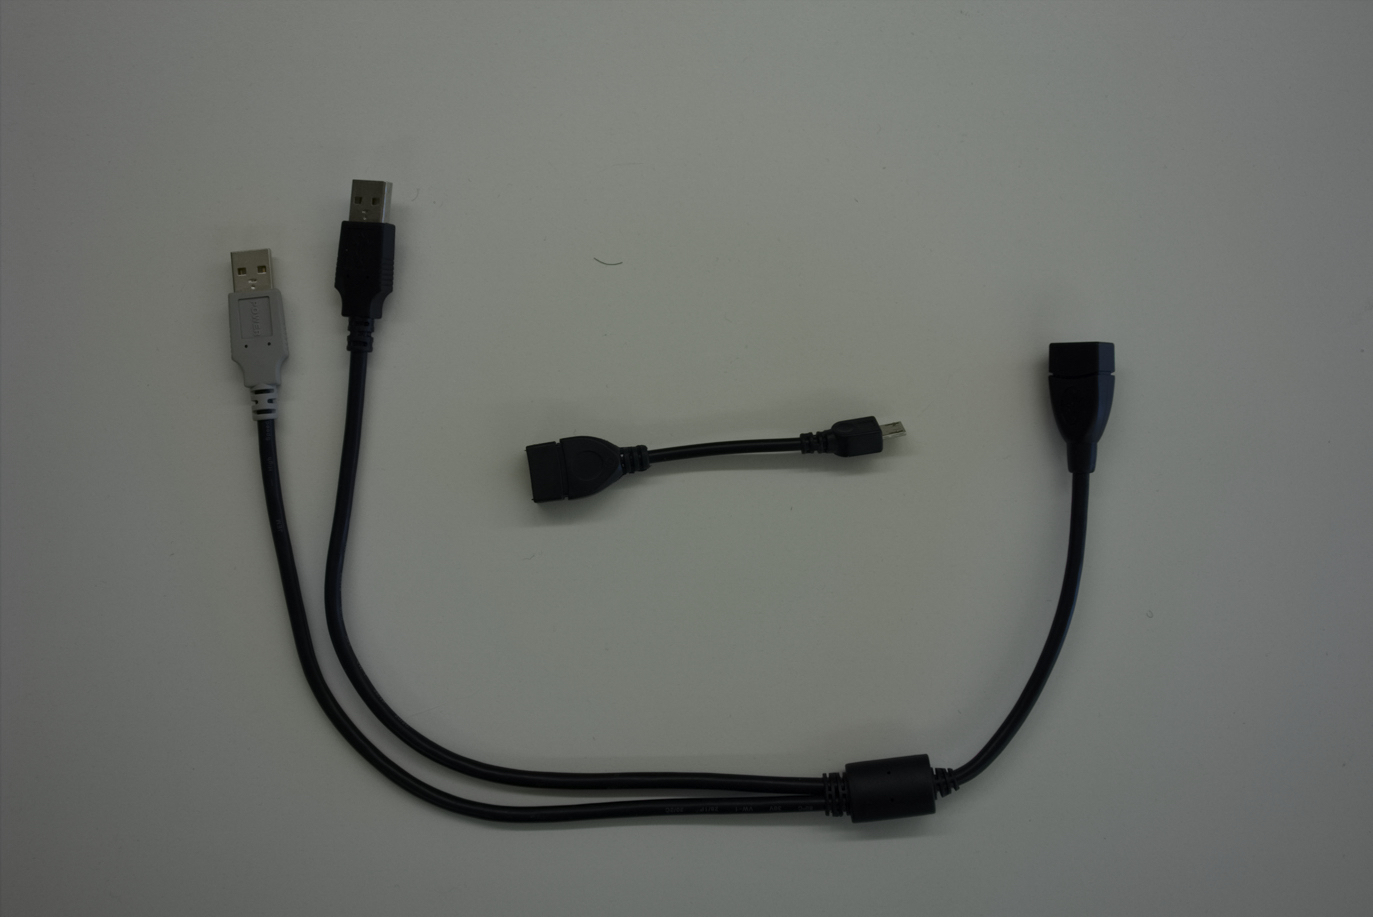 A y-cable and an On-the-go cable